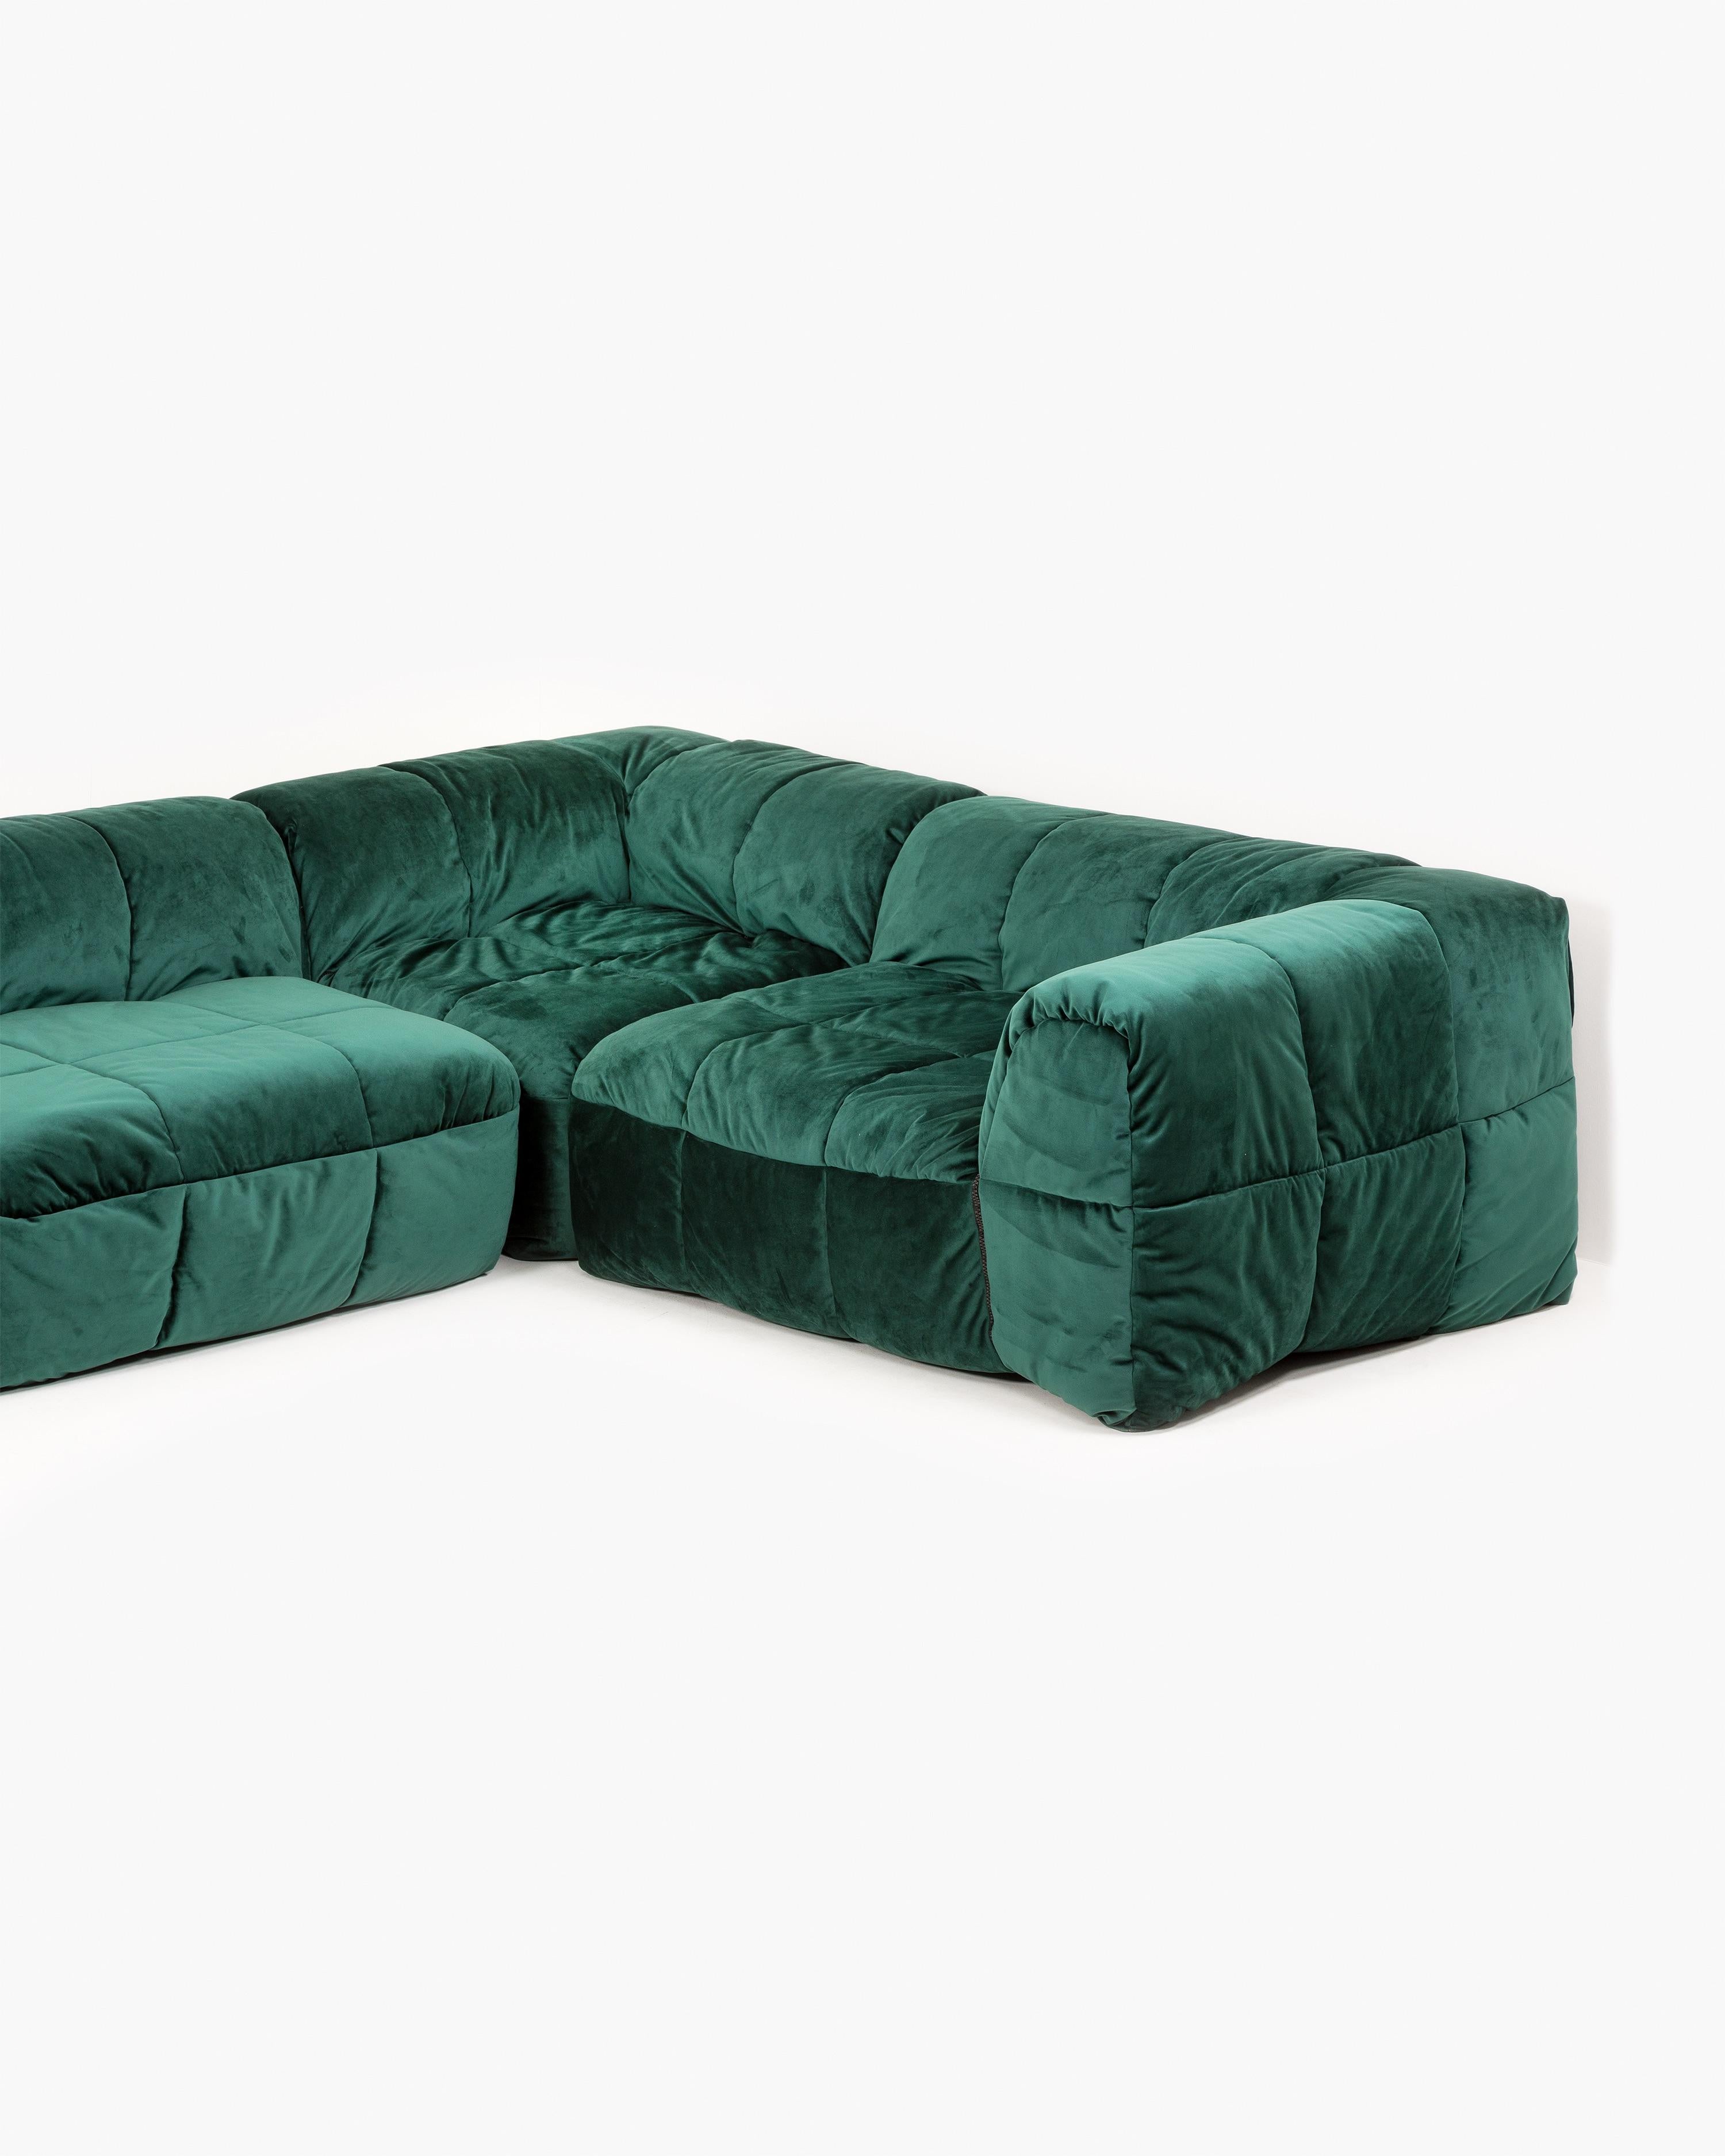 Arflex Strips Sofa by Cini Boeri

Stunning Strips sofa by Cini Boeri completely newly upholstered in a green/ jade colored fabric. One of the most famous products of Arflex. Designed in 1968, it was awarded the prize Compasso d'Oro and it is